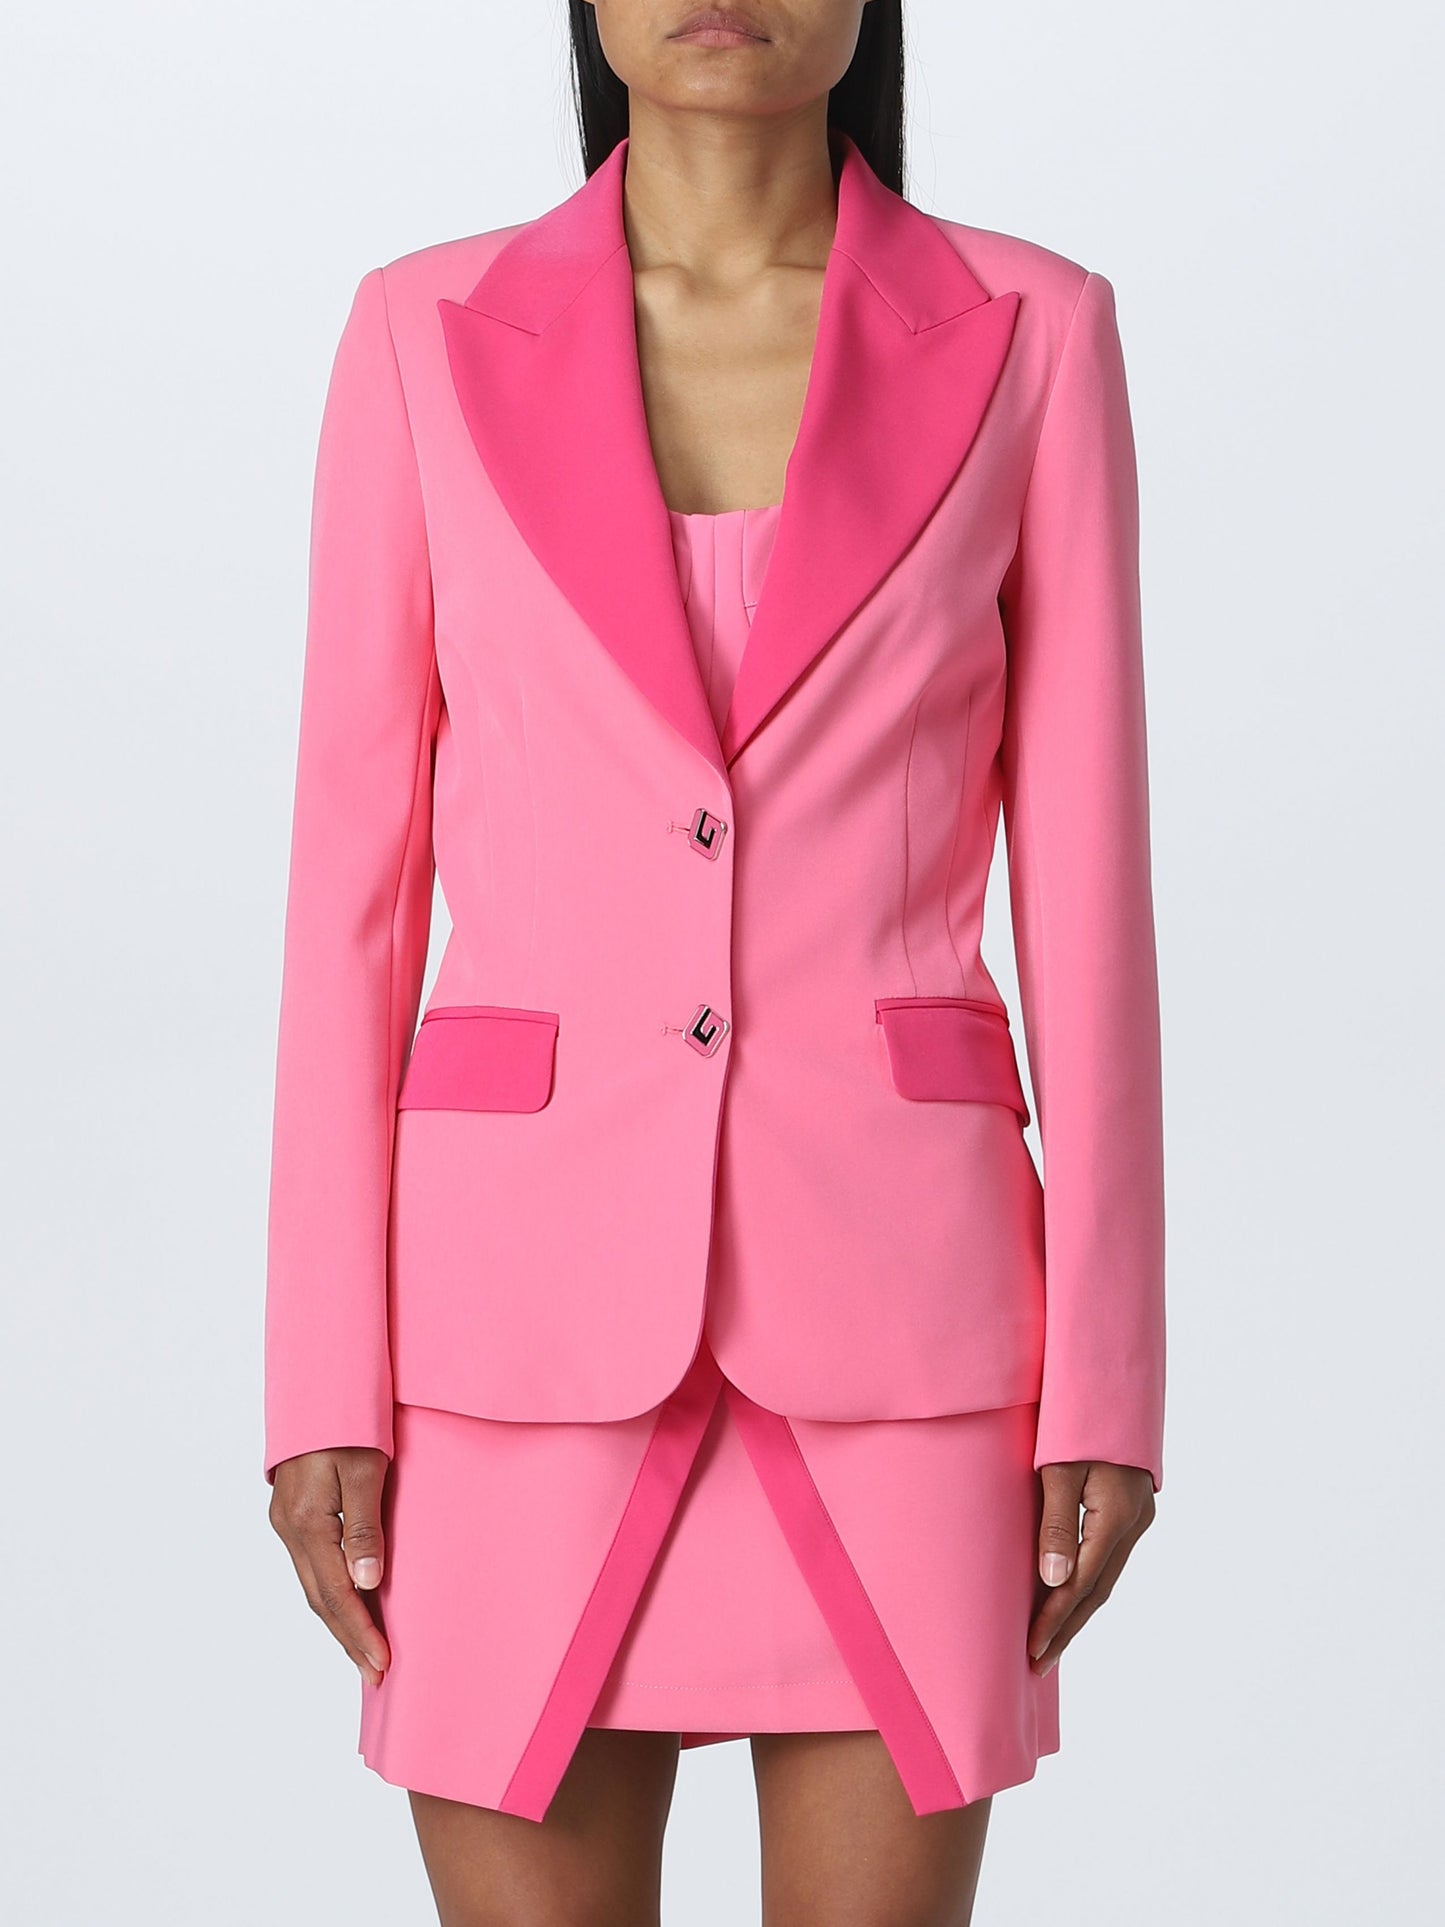 Single-Breasted Pink Jacket